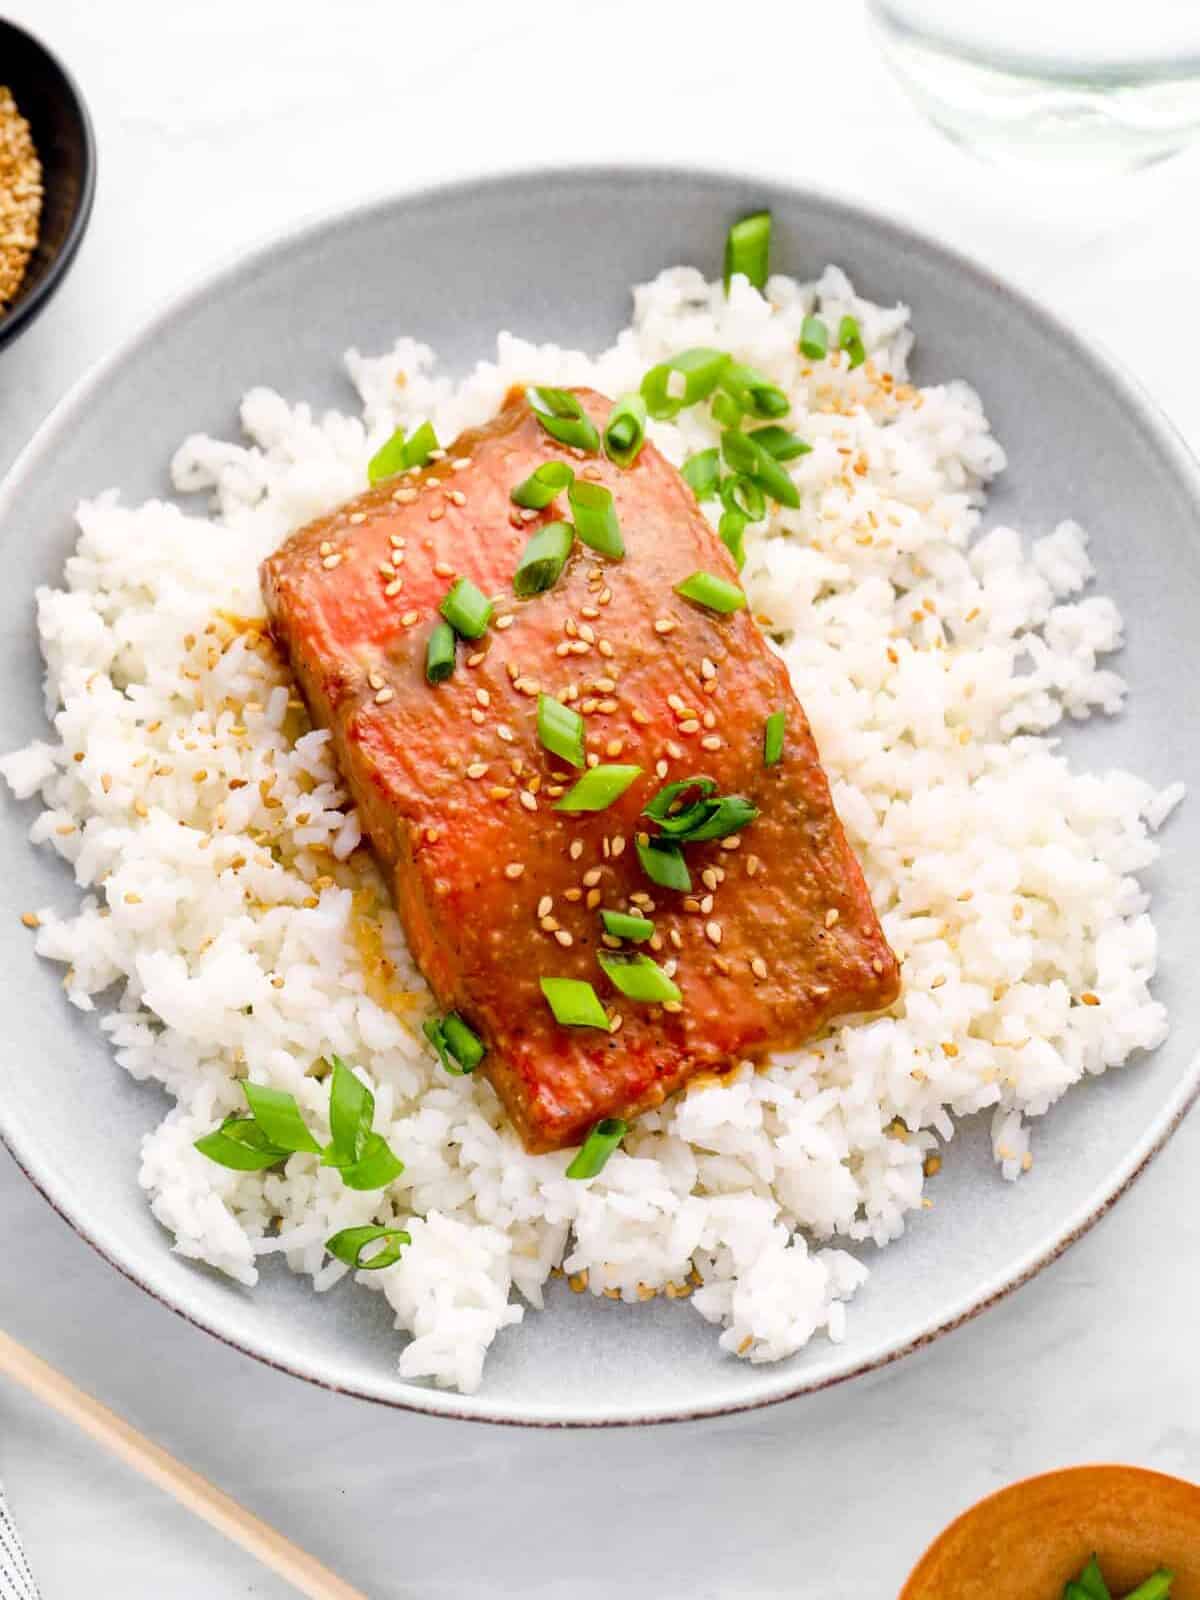 miso glazed salmon on a bed of white rice on a white plate.